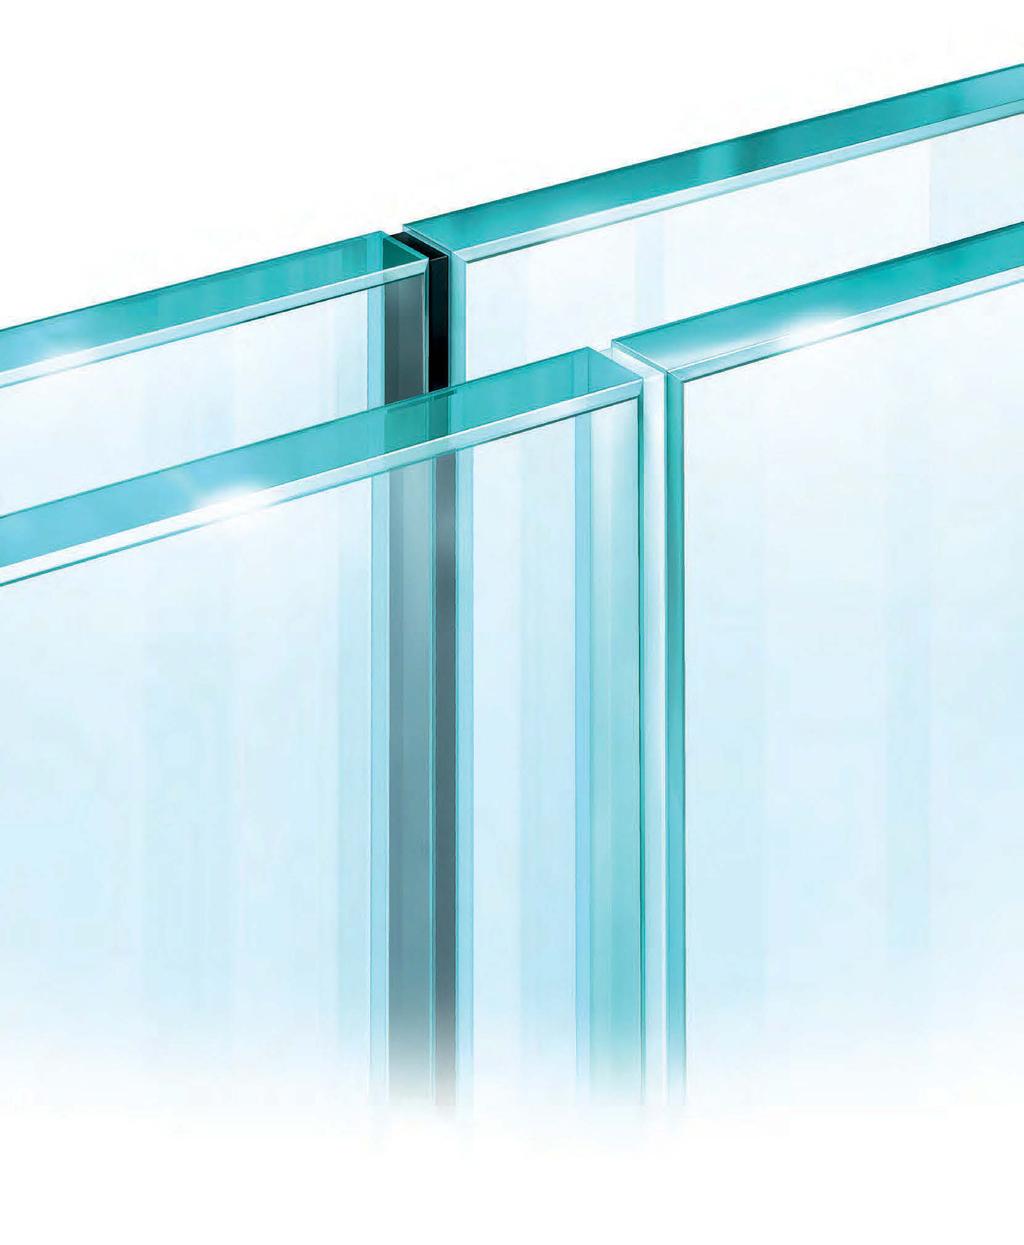 Glass on Aluminum Frame Glass on H-Profile Bonding glass or laminated wood into or onto an aluminum frame